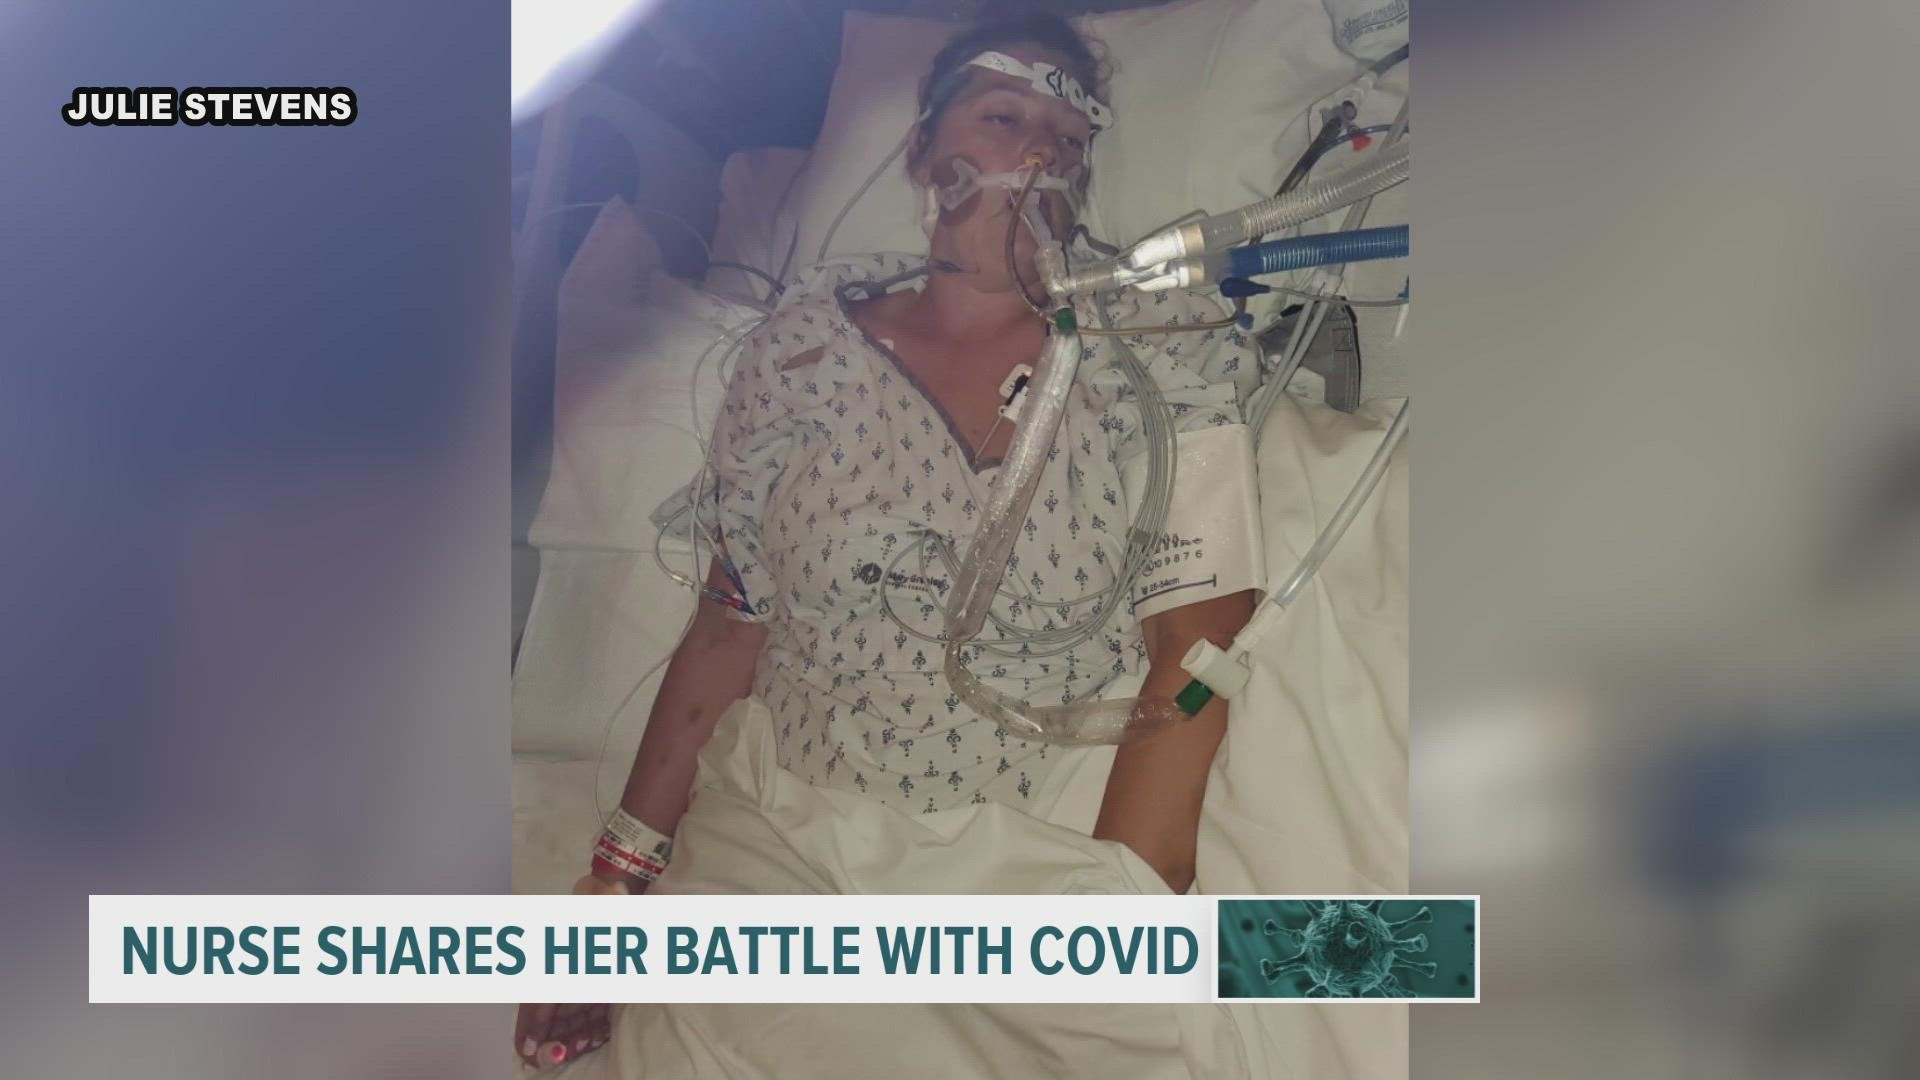 Julie Stevens, who didn't get the shot, was later put on a ventilator due to the virus.